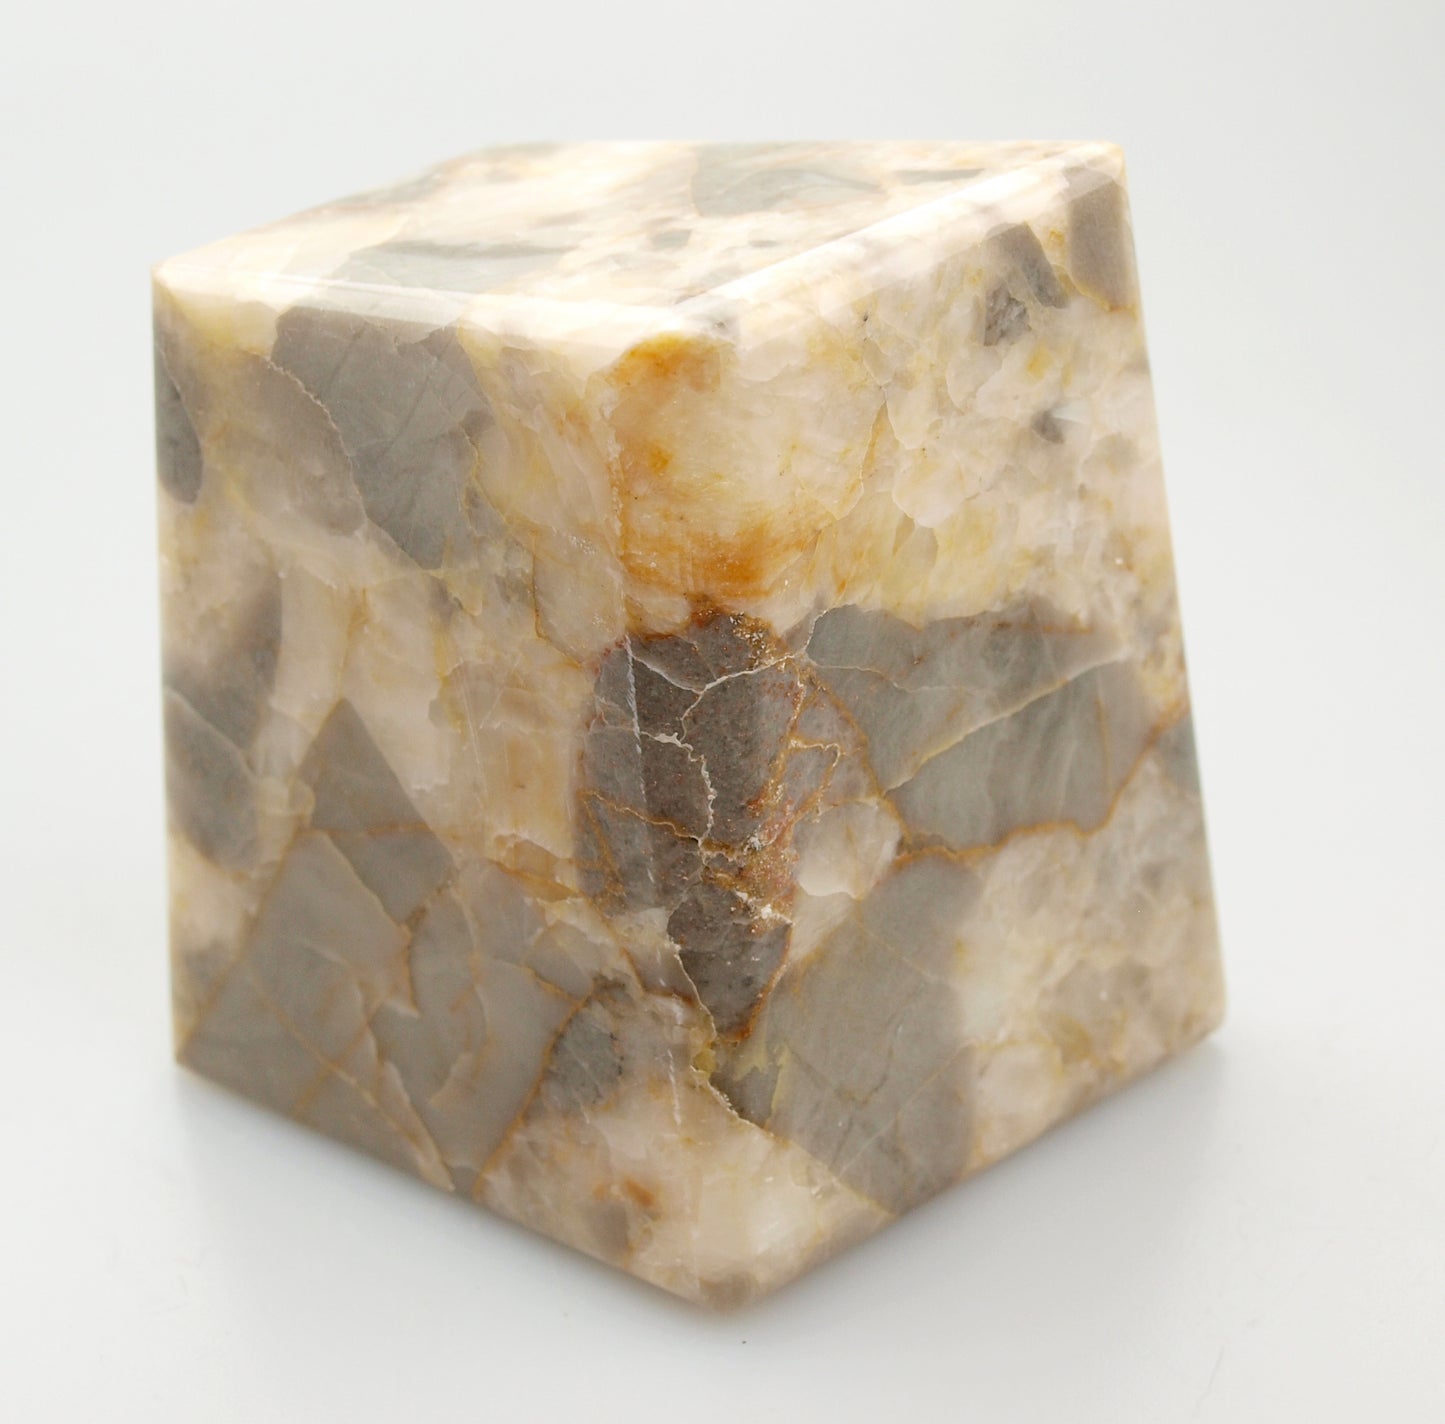 Paperweight of yellow calcite breccia with limestone and coral